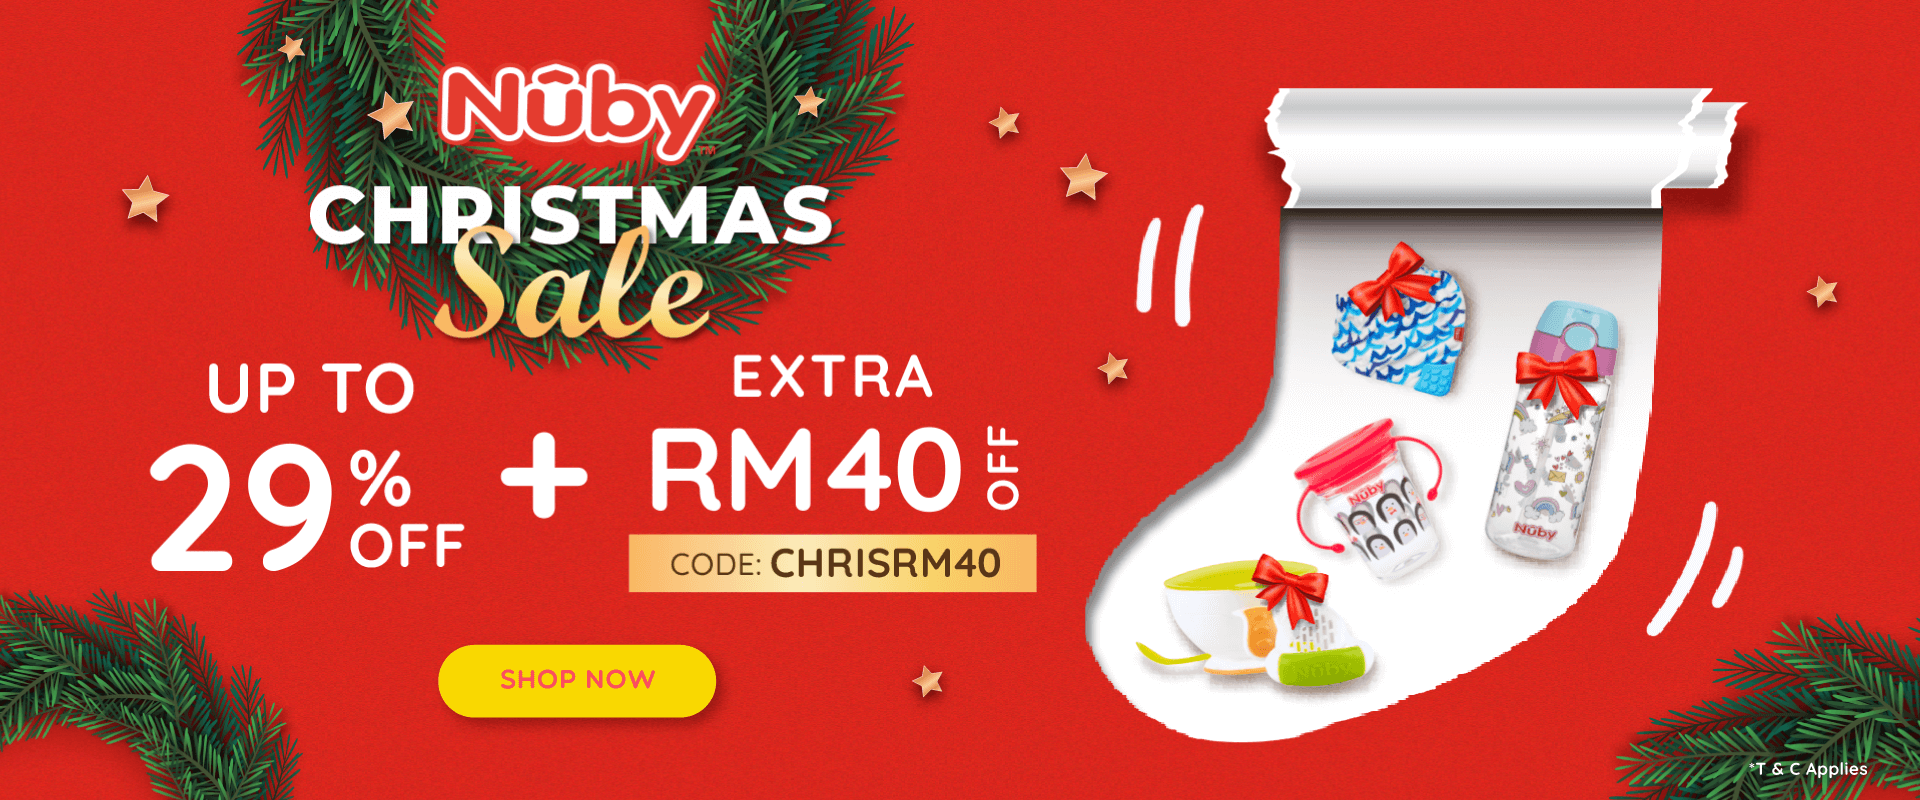 Astra Family Nubby christmas sale up to extra 40% off.